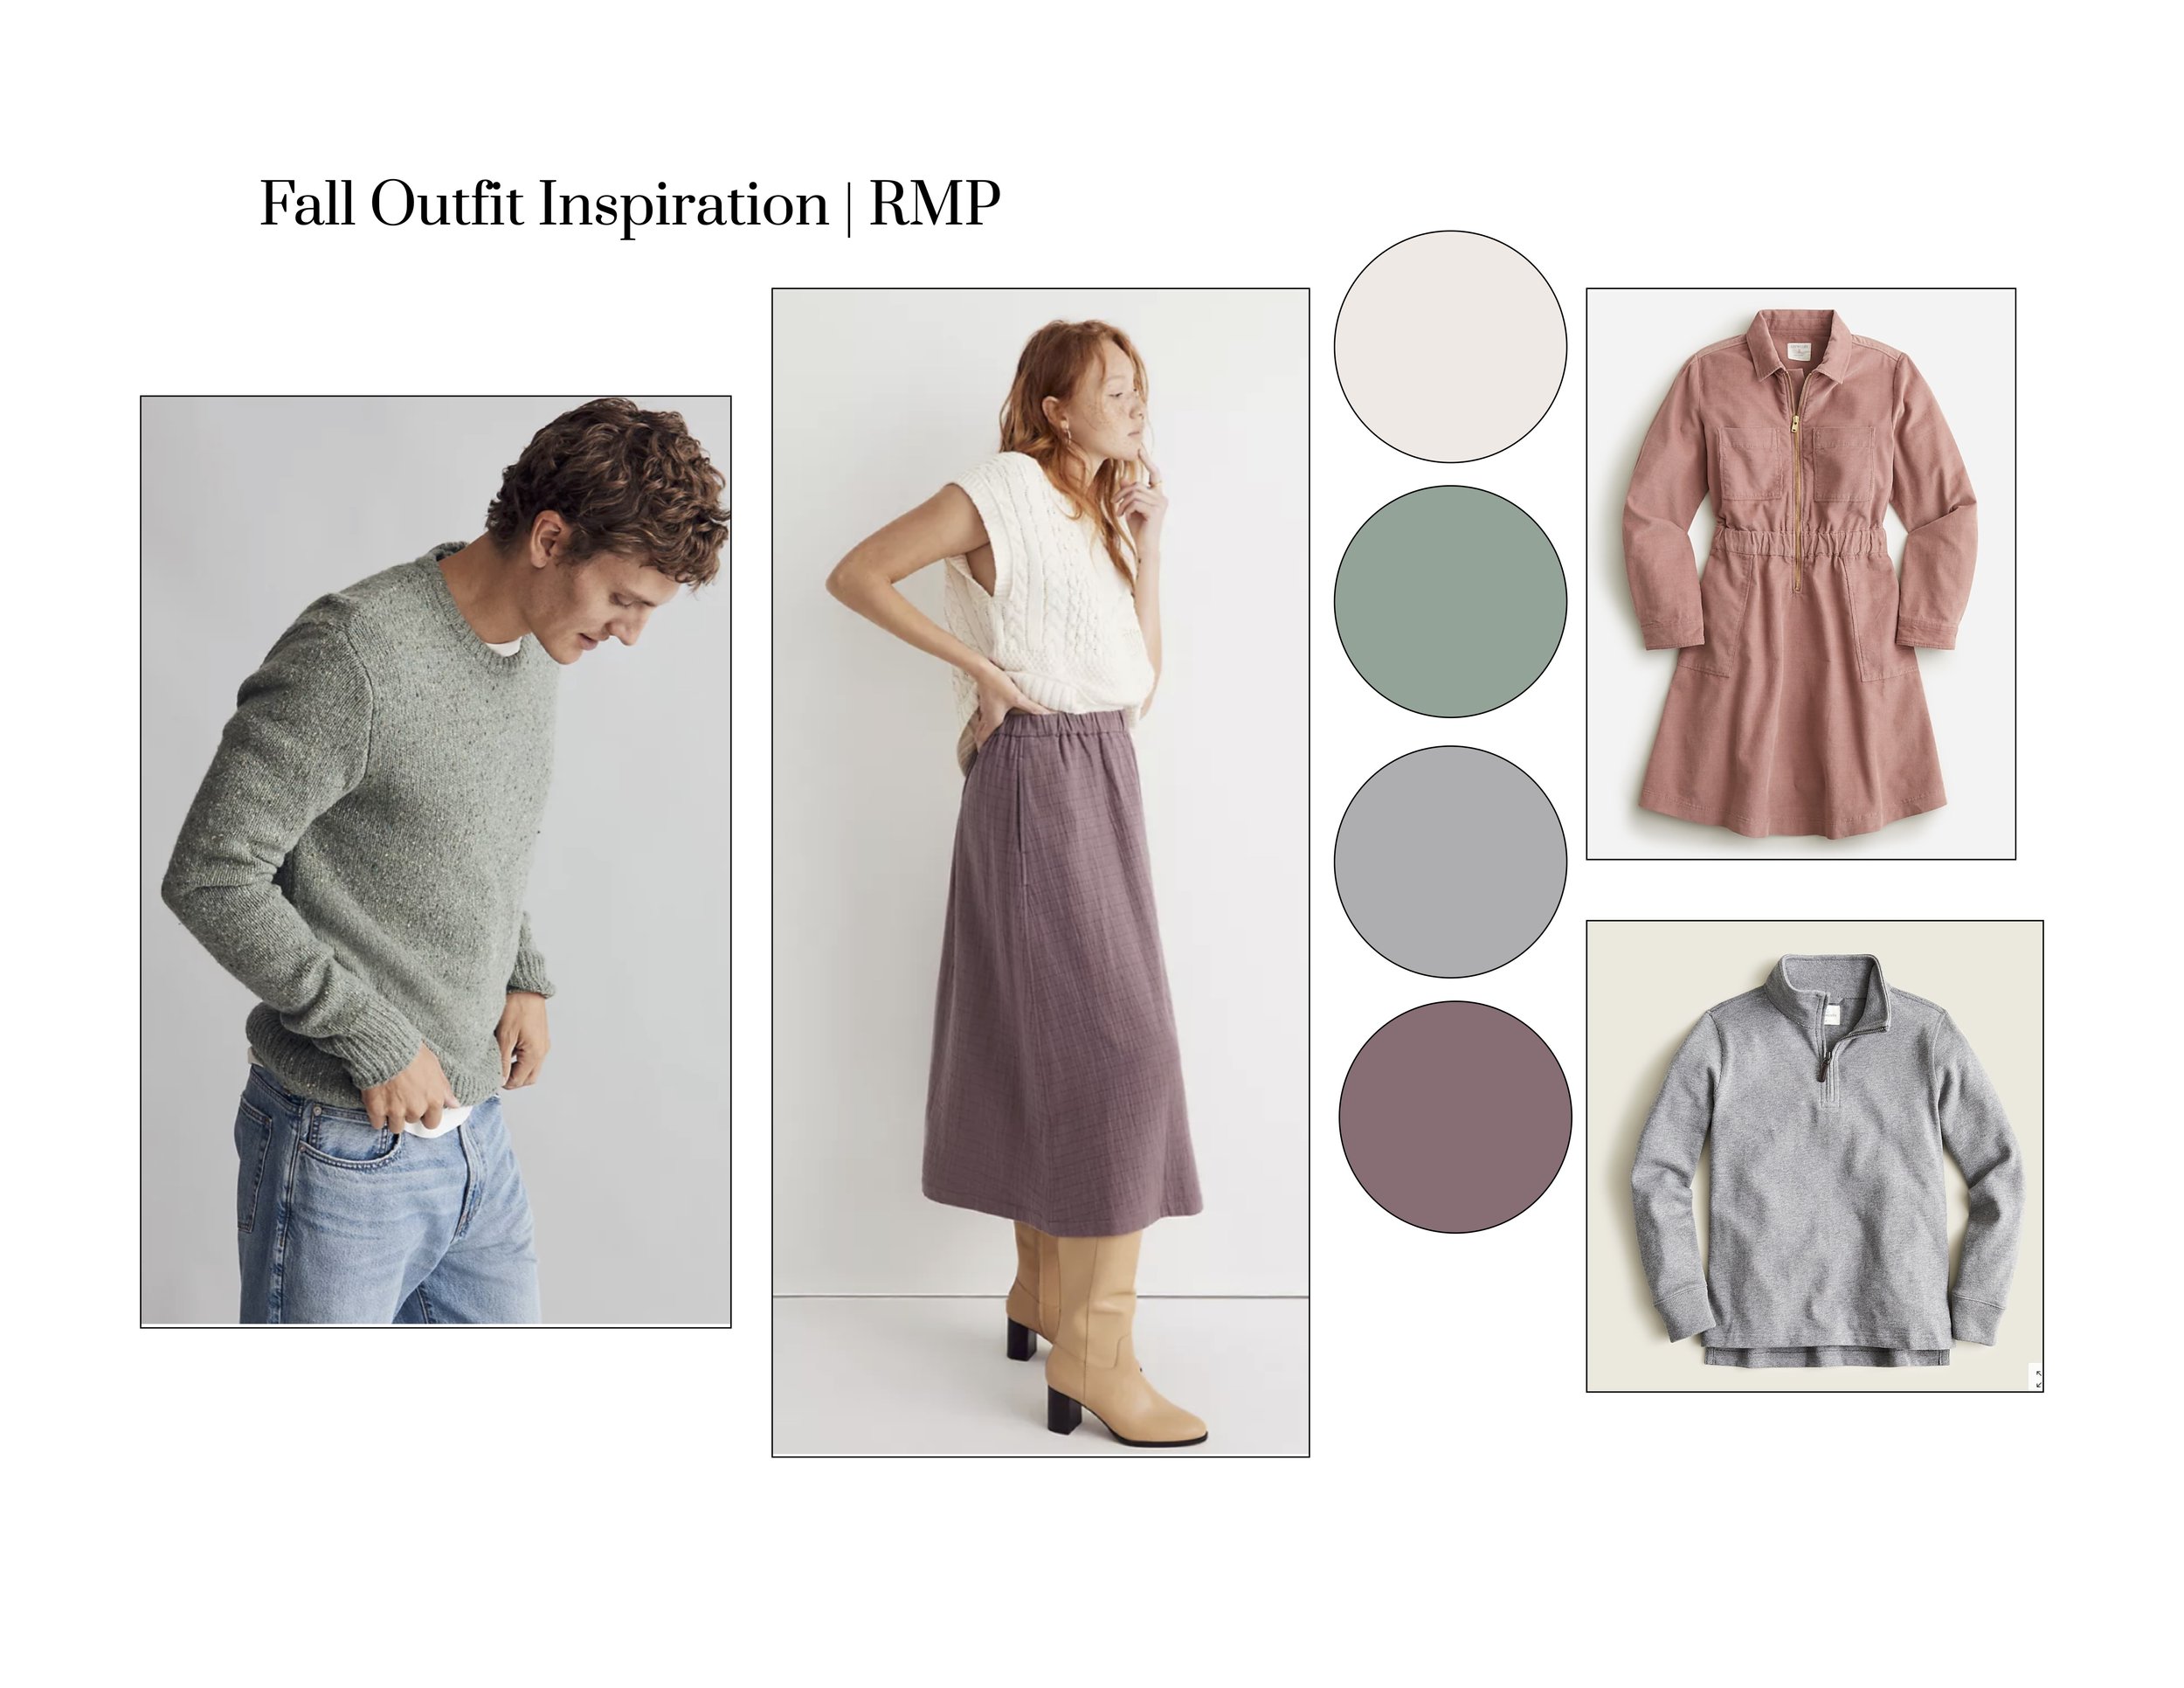 Fall Outfit Inspiration 5.jpg